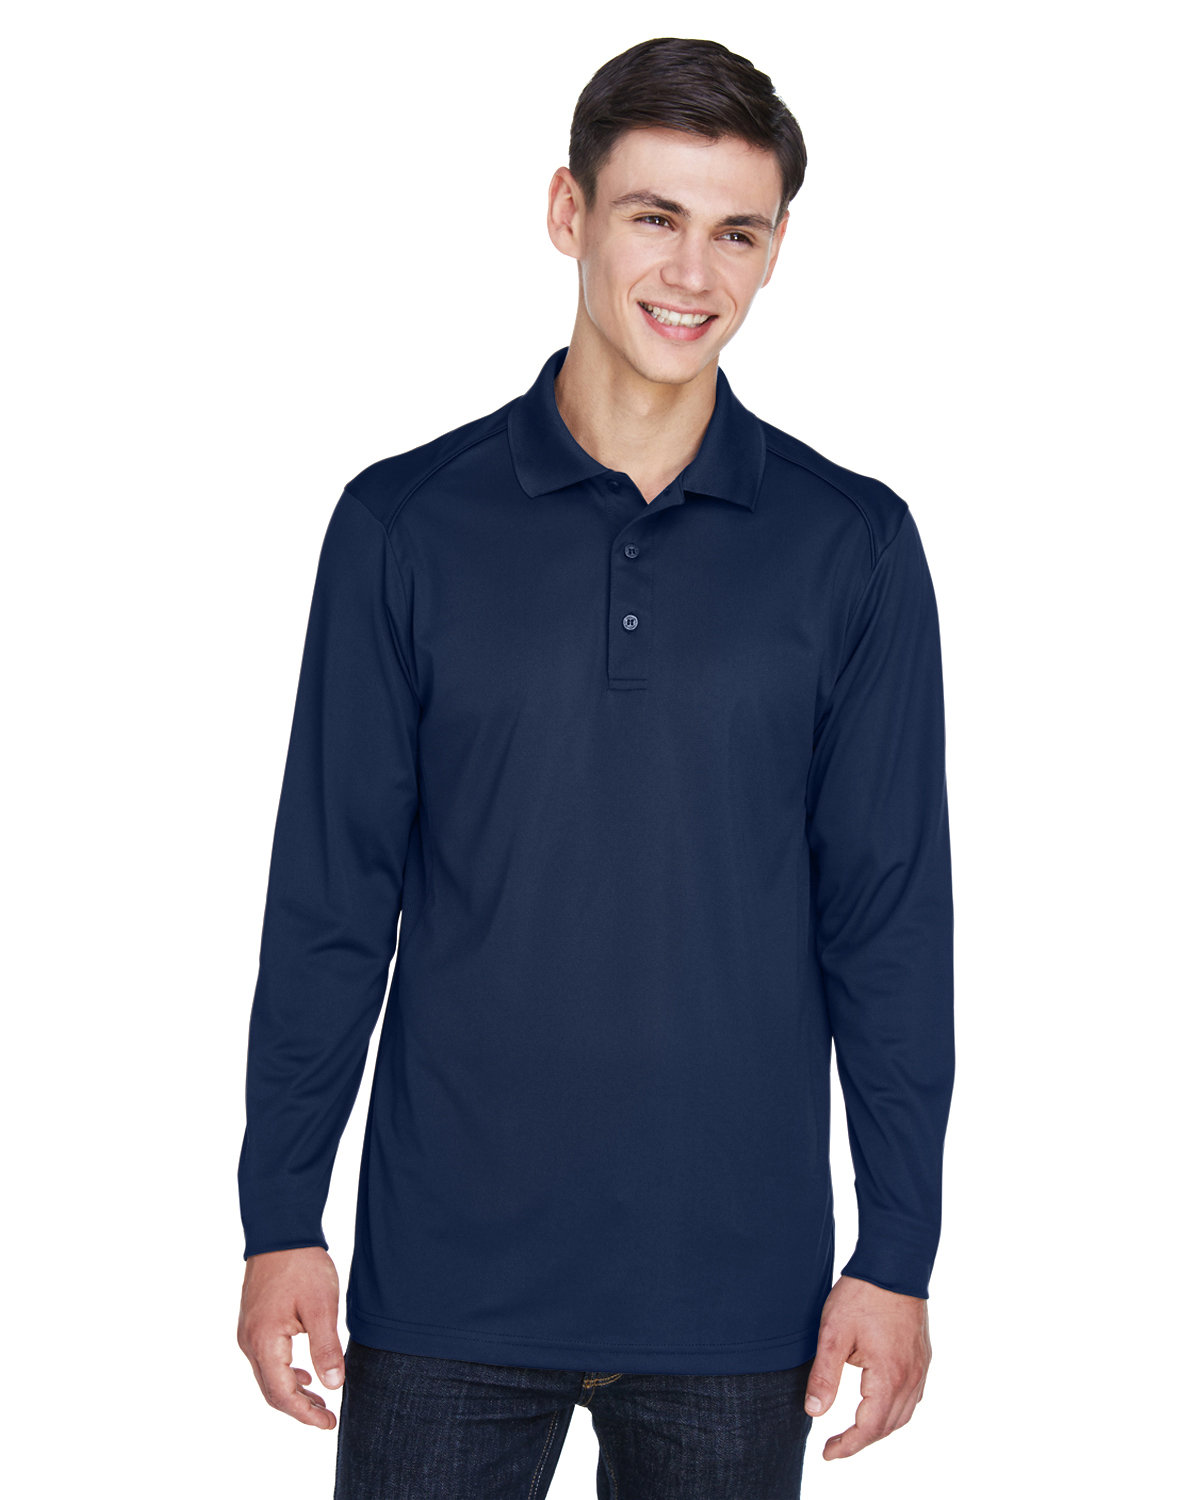 Extreme Men's Eperformance™ Snag Protection Long-Sleeve Polo CLASSIC NAVY 